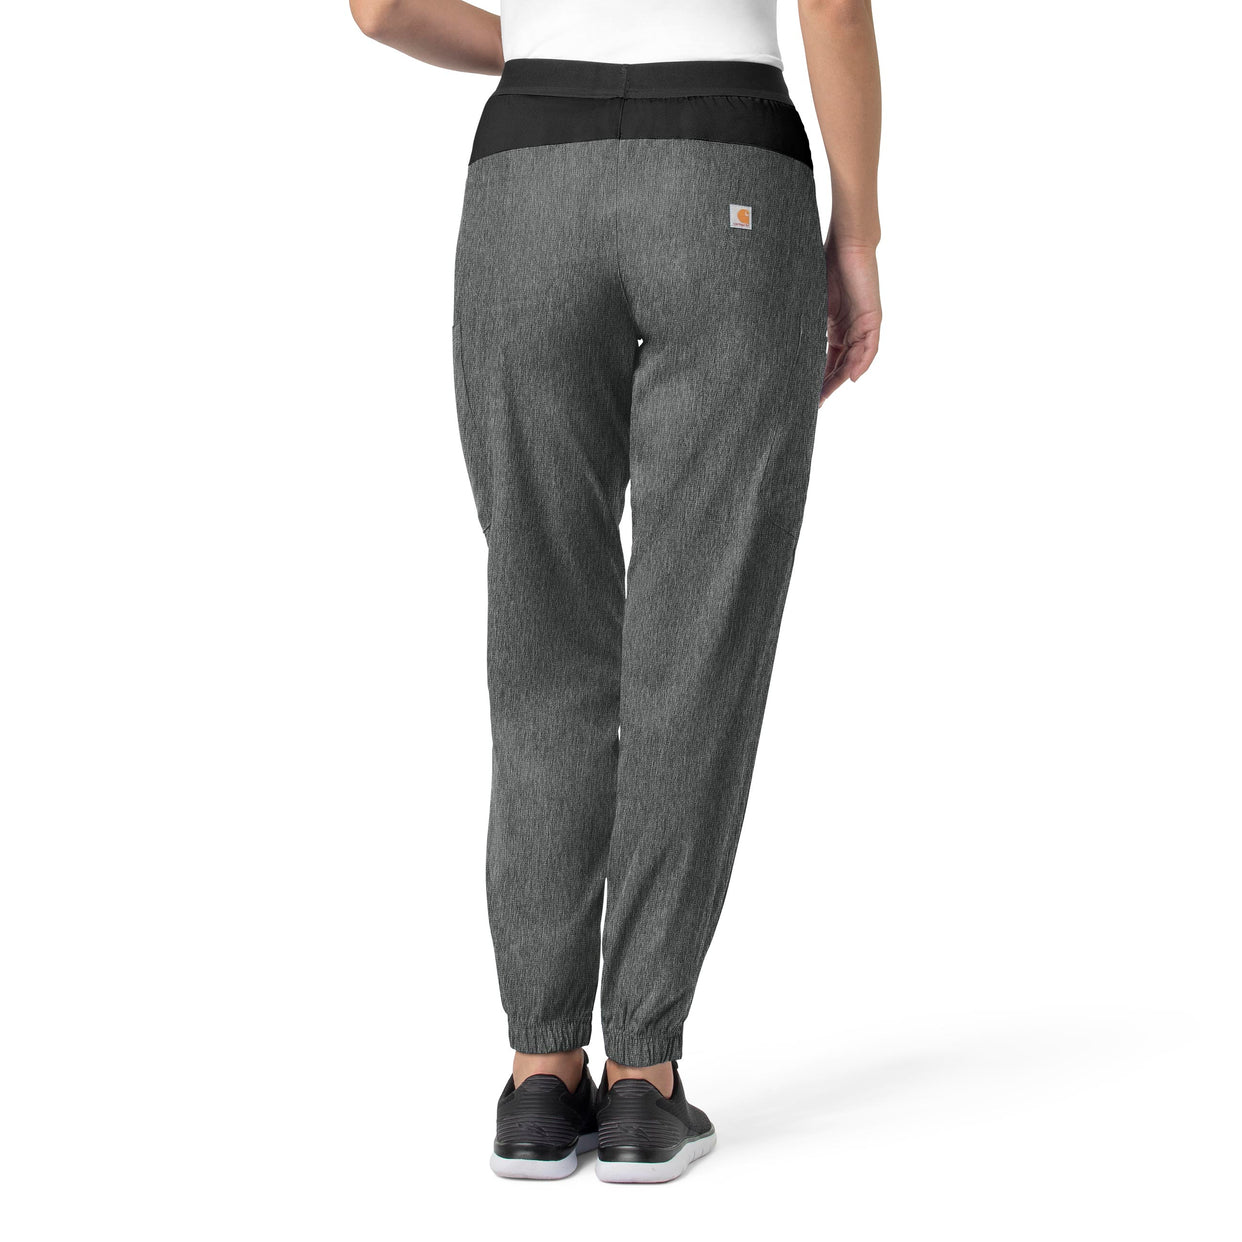 Force Liberty Women's Comfort Cargo Jogger Scrub Pant Charcoal Heather back view